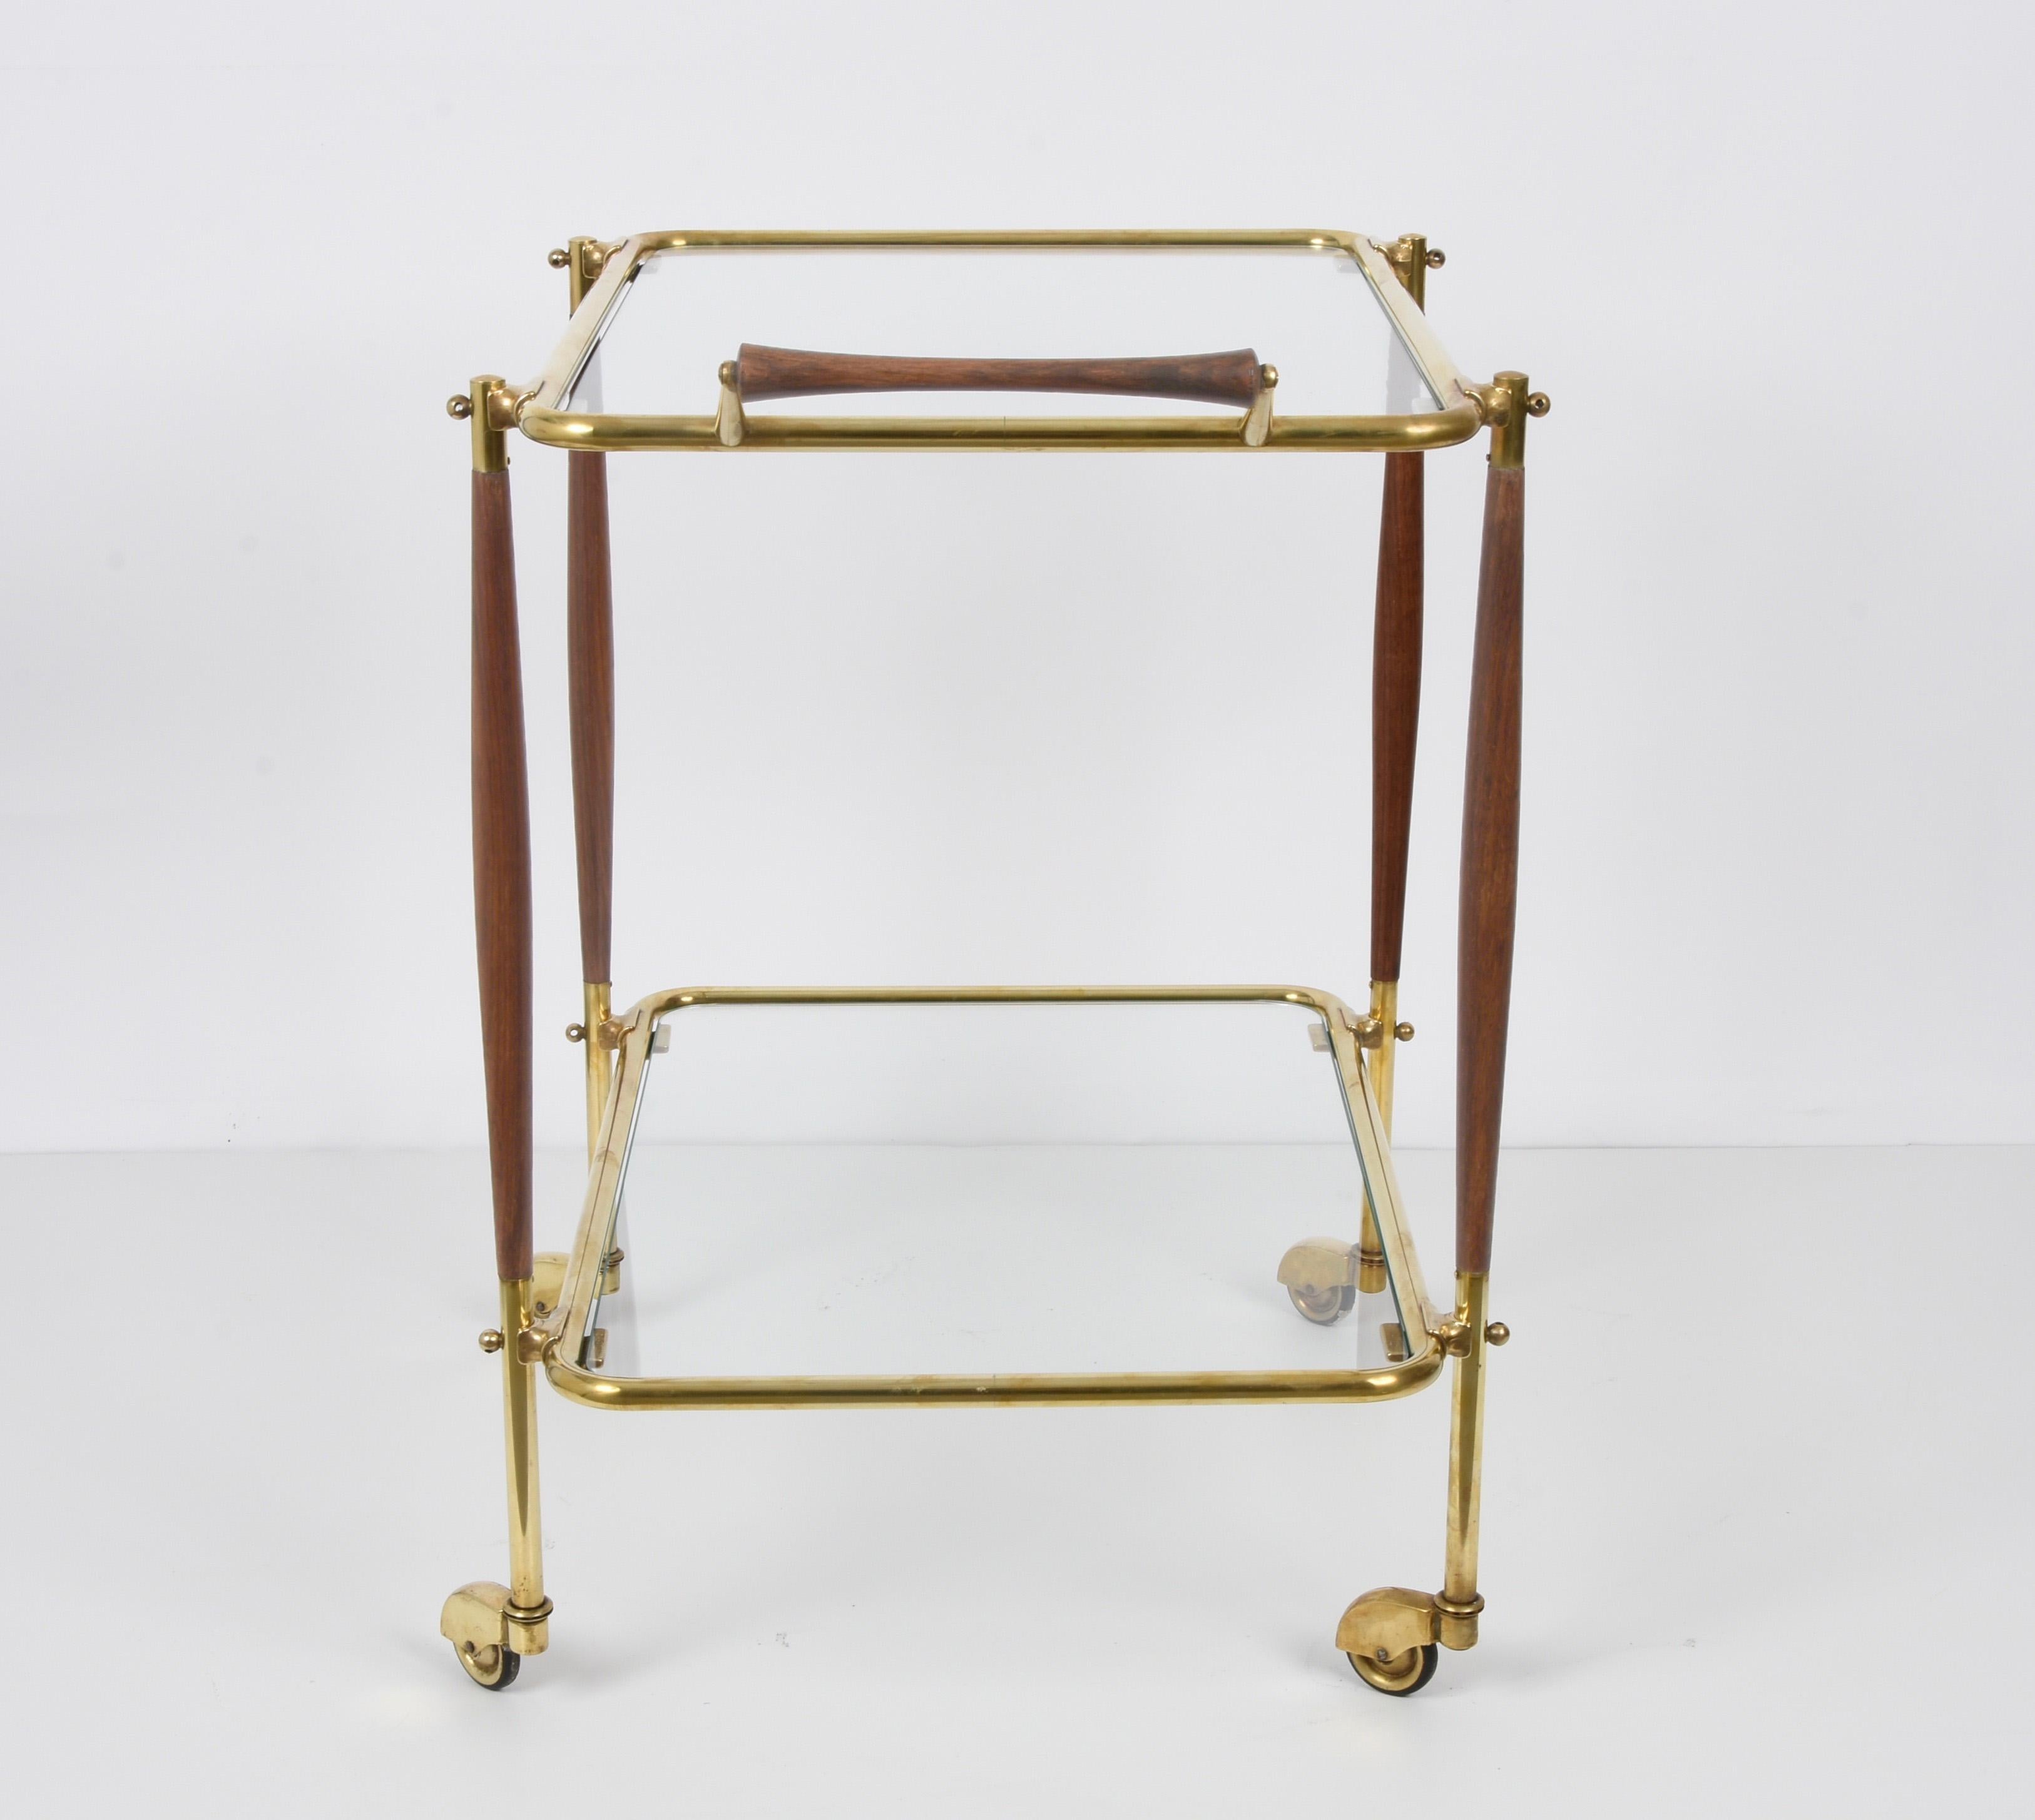 Midcentury Italian Bar Cart Brass and Wood Serving Trolley, 1950s 4